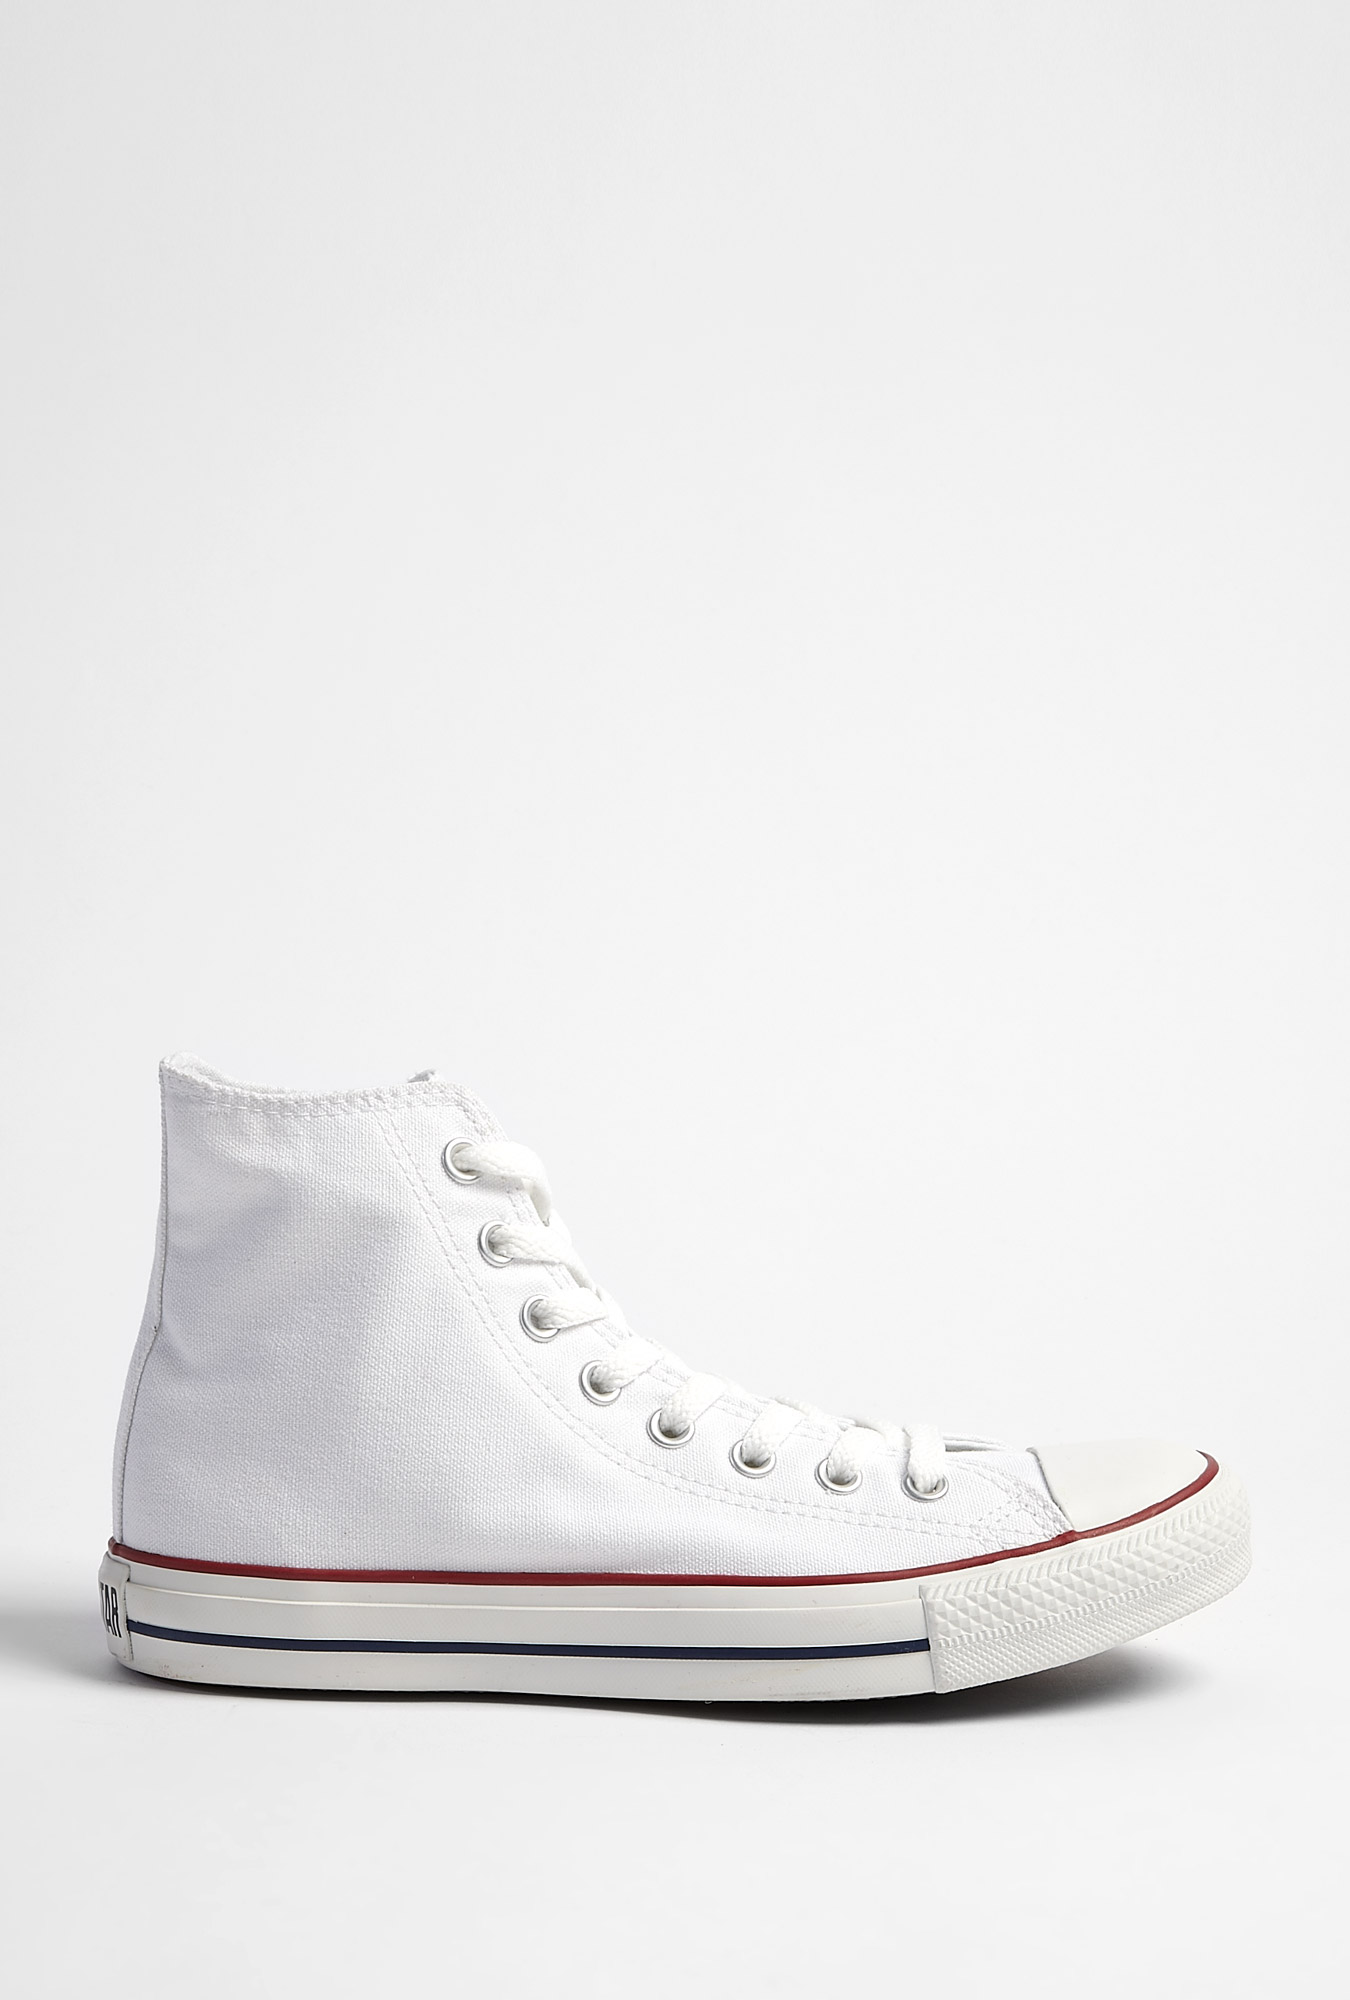 Converse White Classic Chuck Taylor High Top in White | Lyst